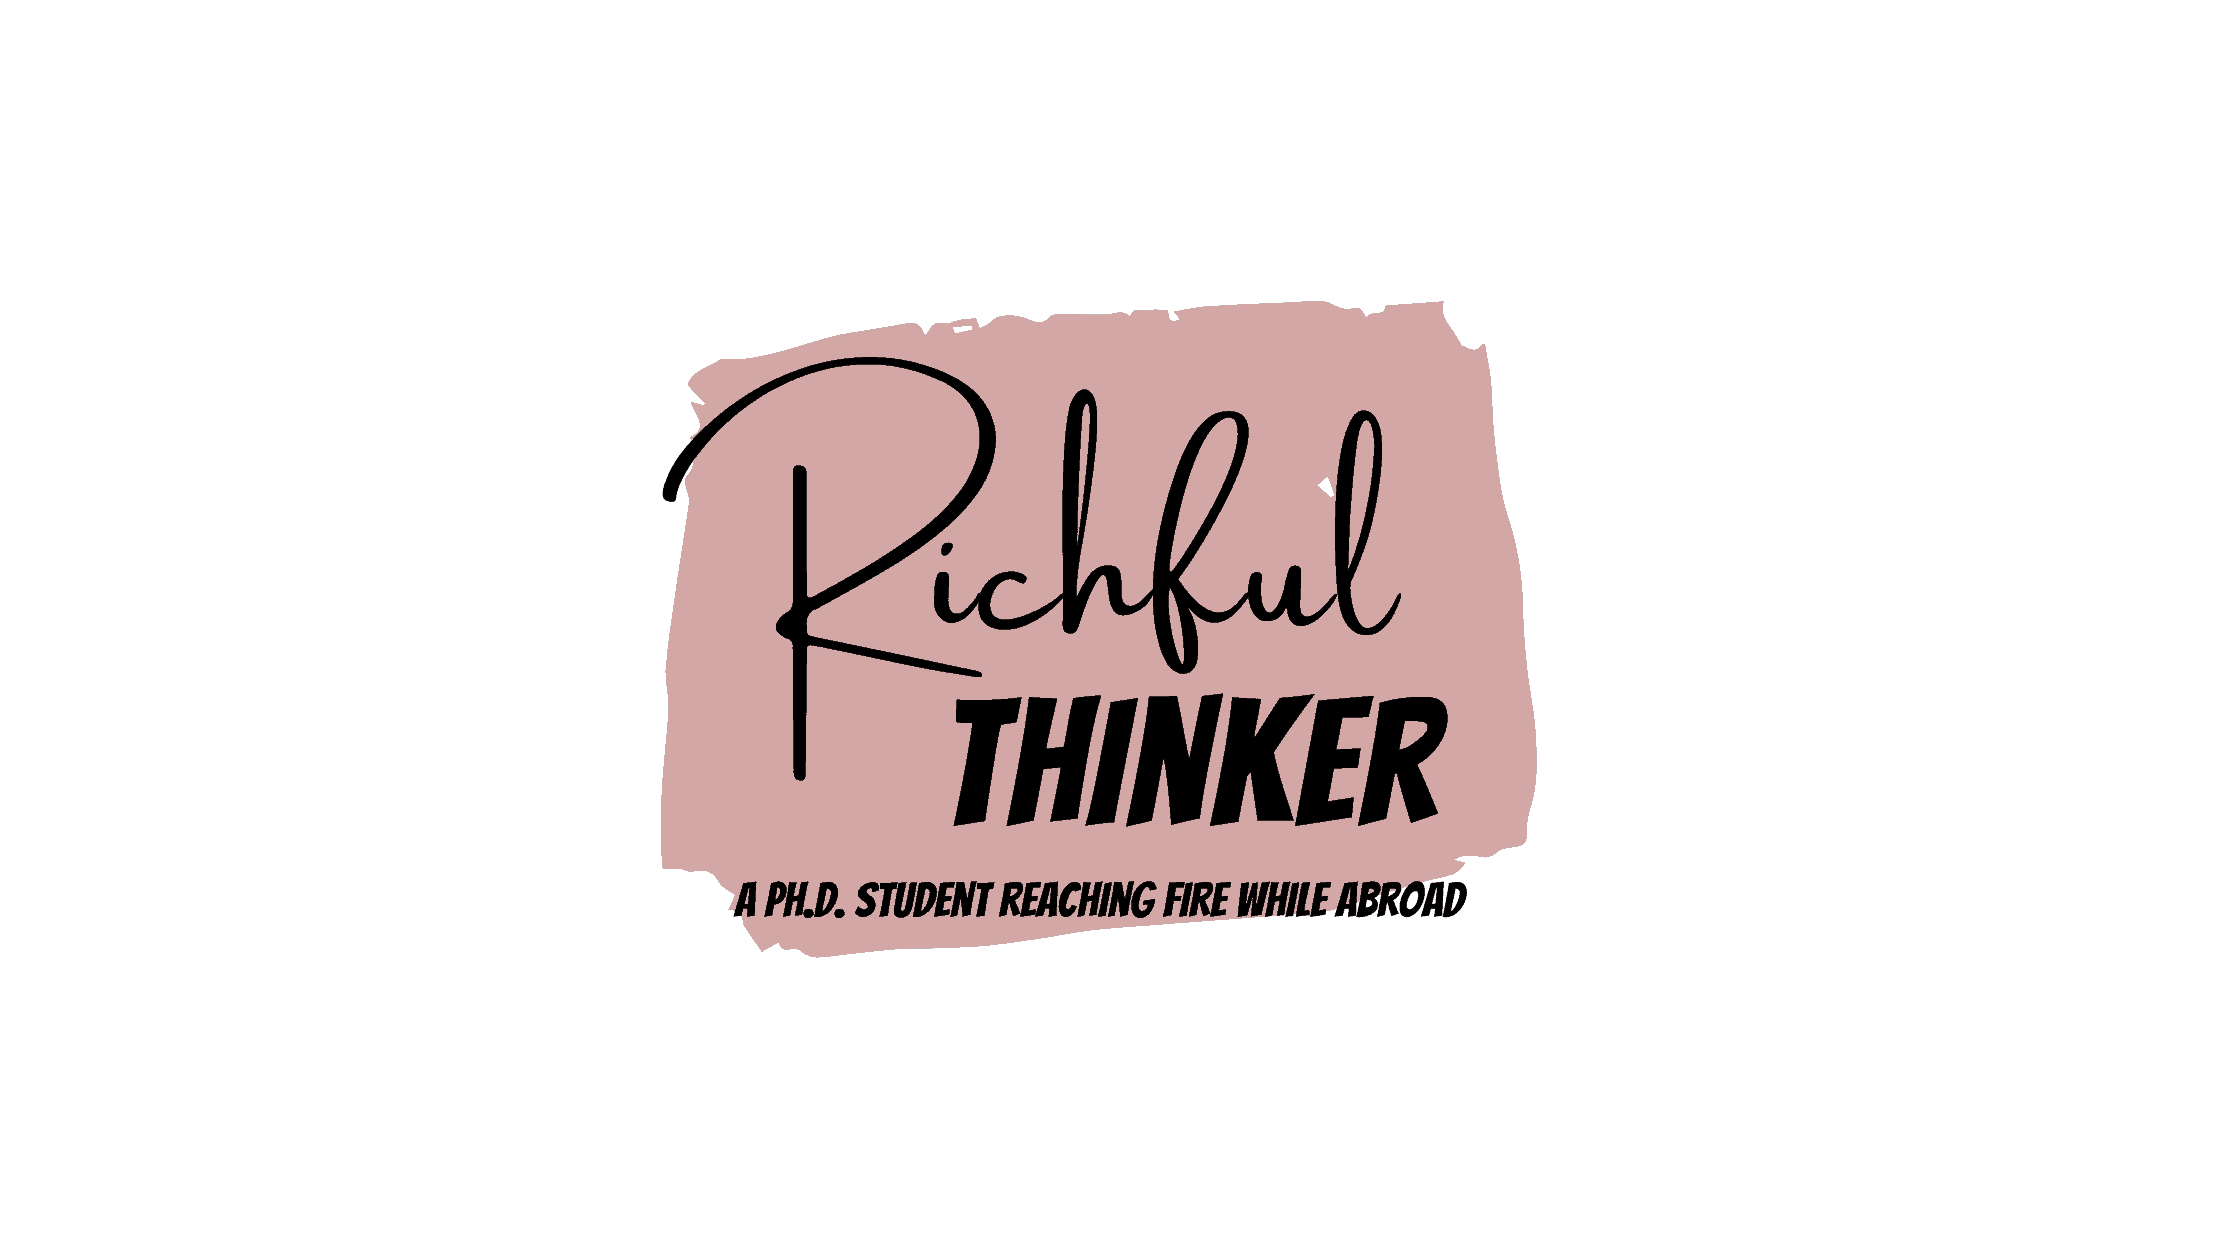 Richful thinker: a ph.d. student reaching fire while abroad.